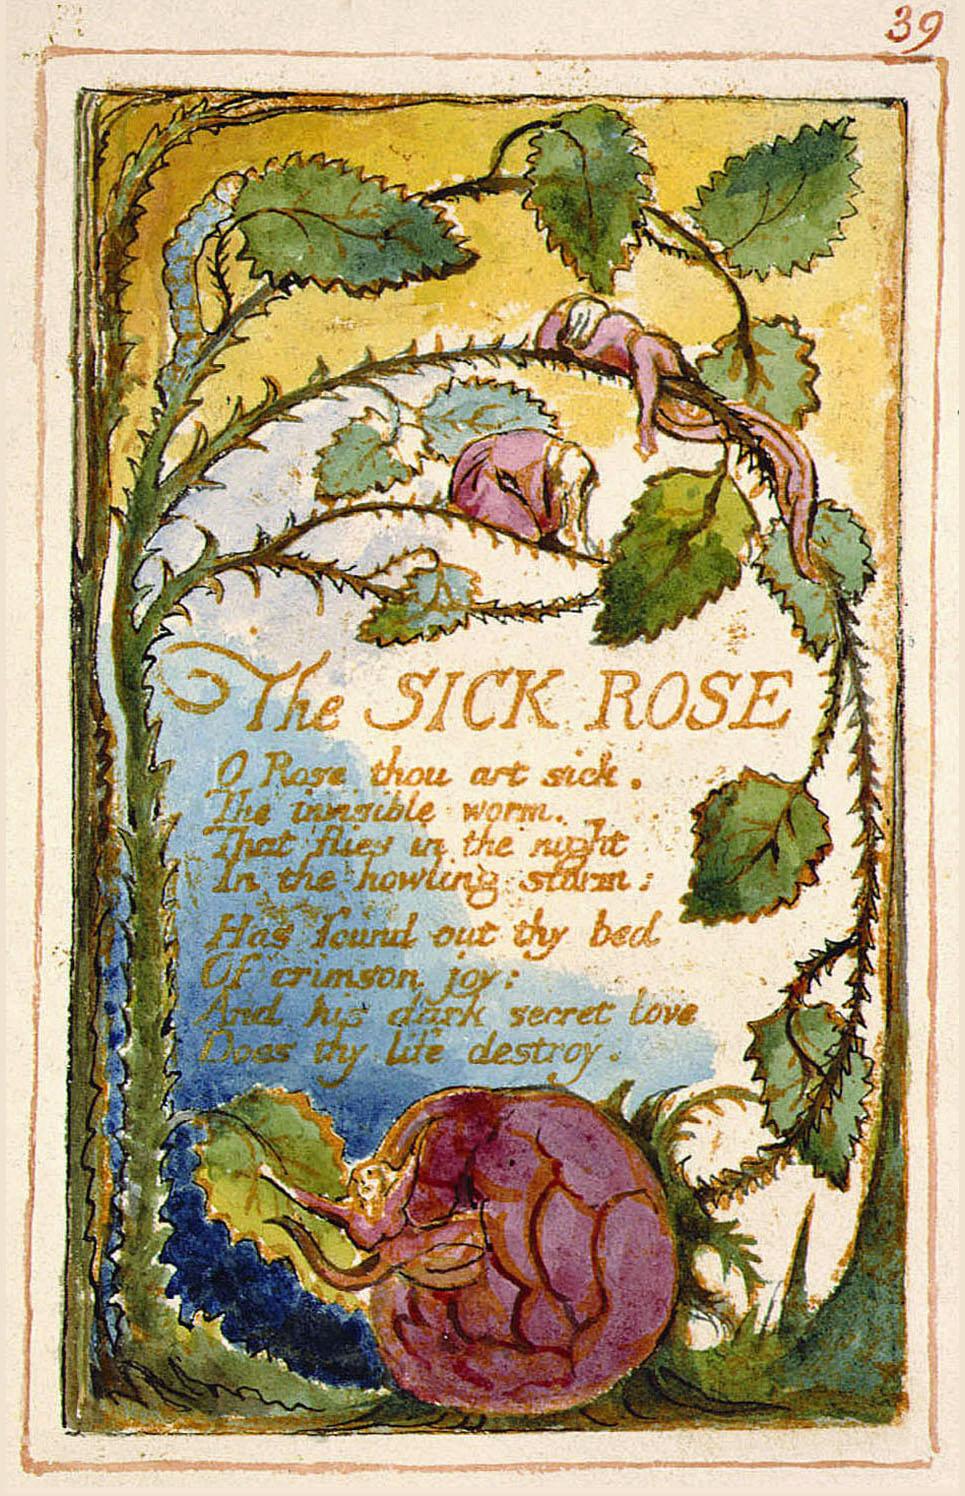 Songs of Innocence and Experience THE SICK ROSE O rose, thou art sick!